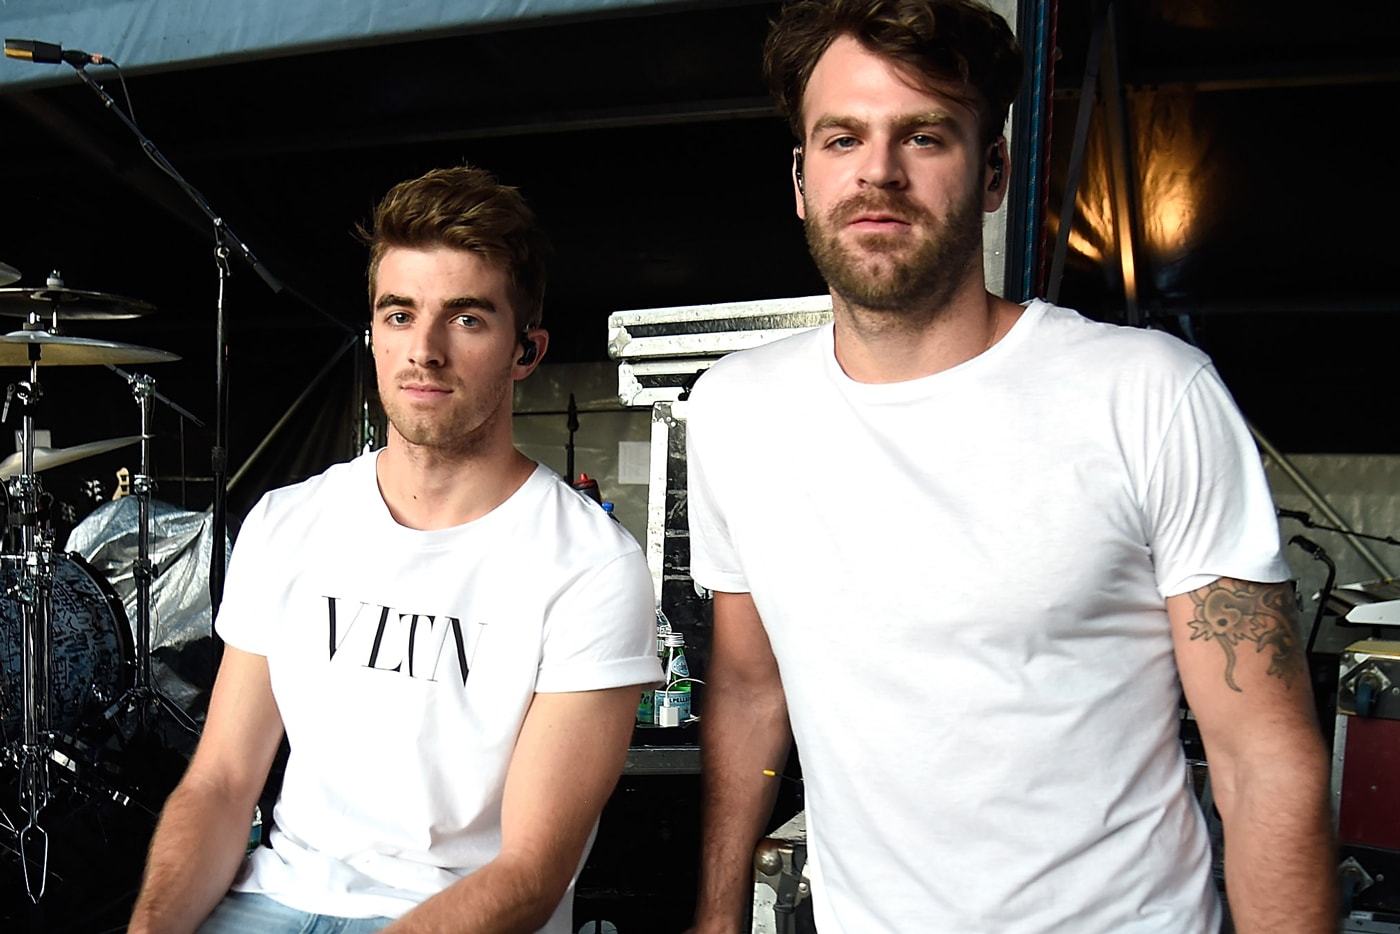 The Chainsmokers Share New Single "Don't Let Me Down"